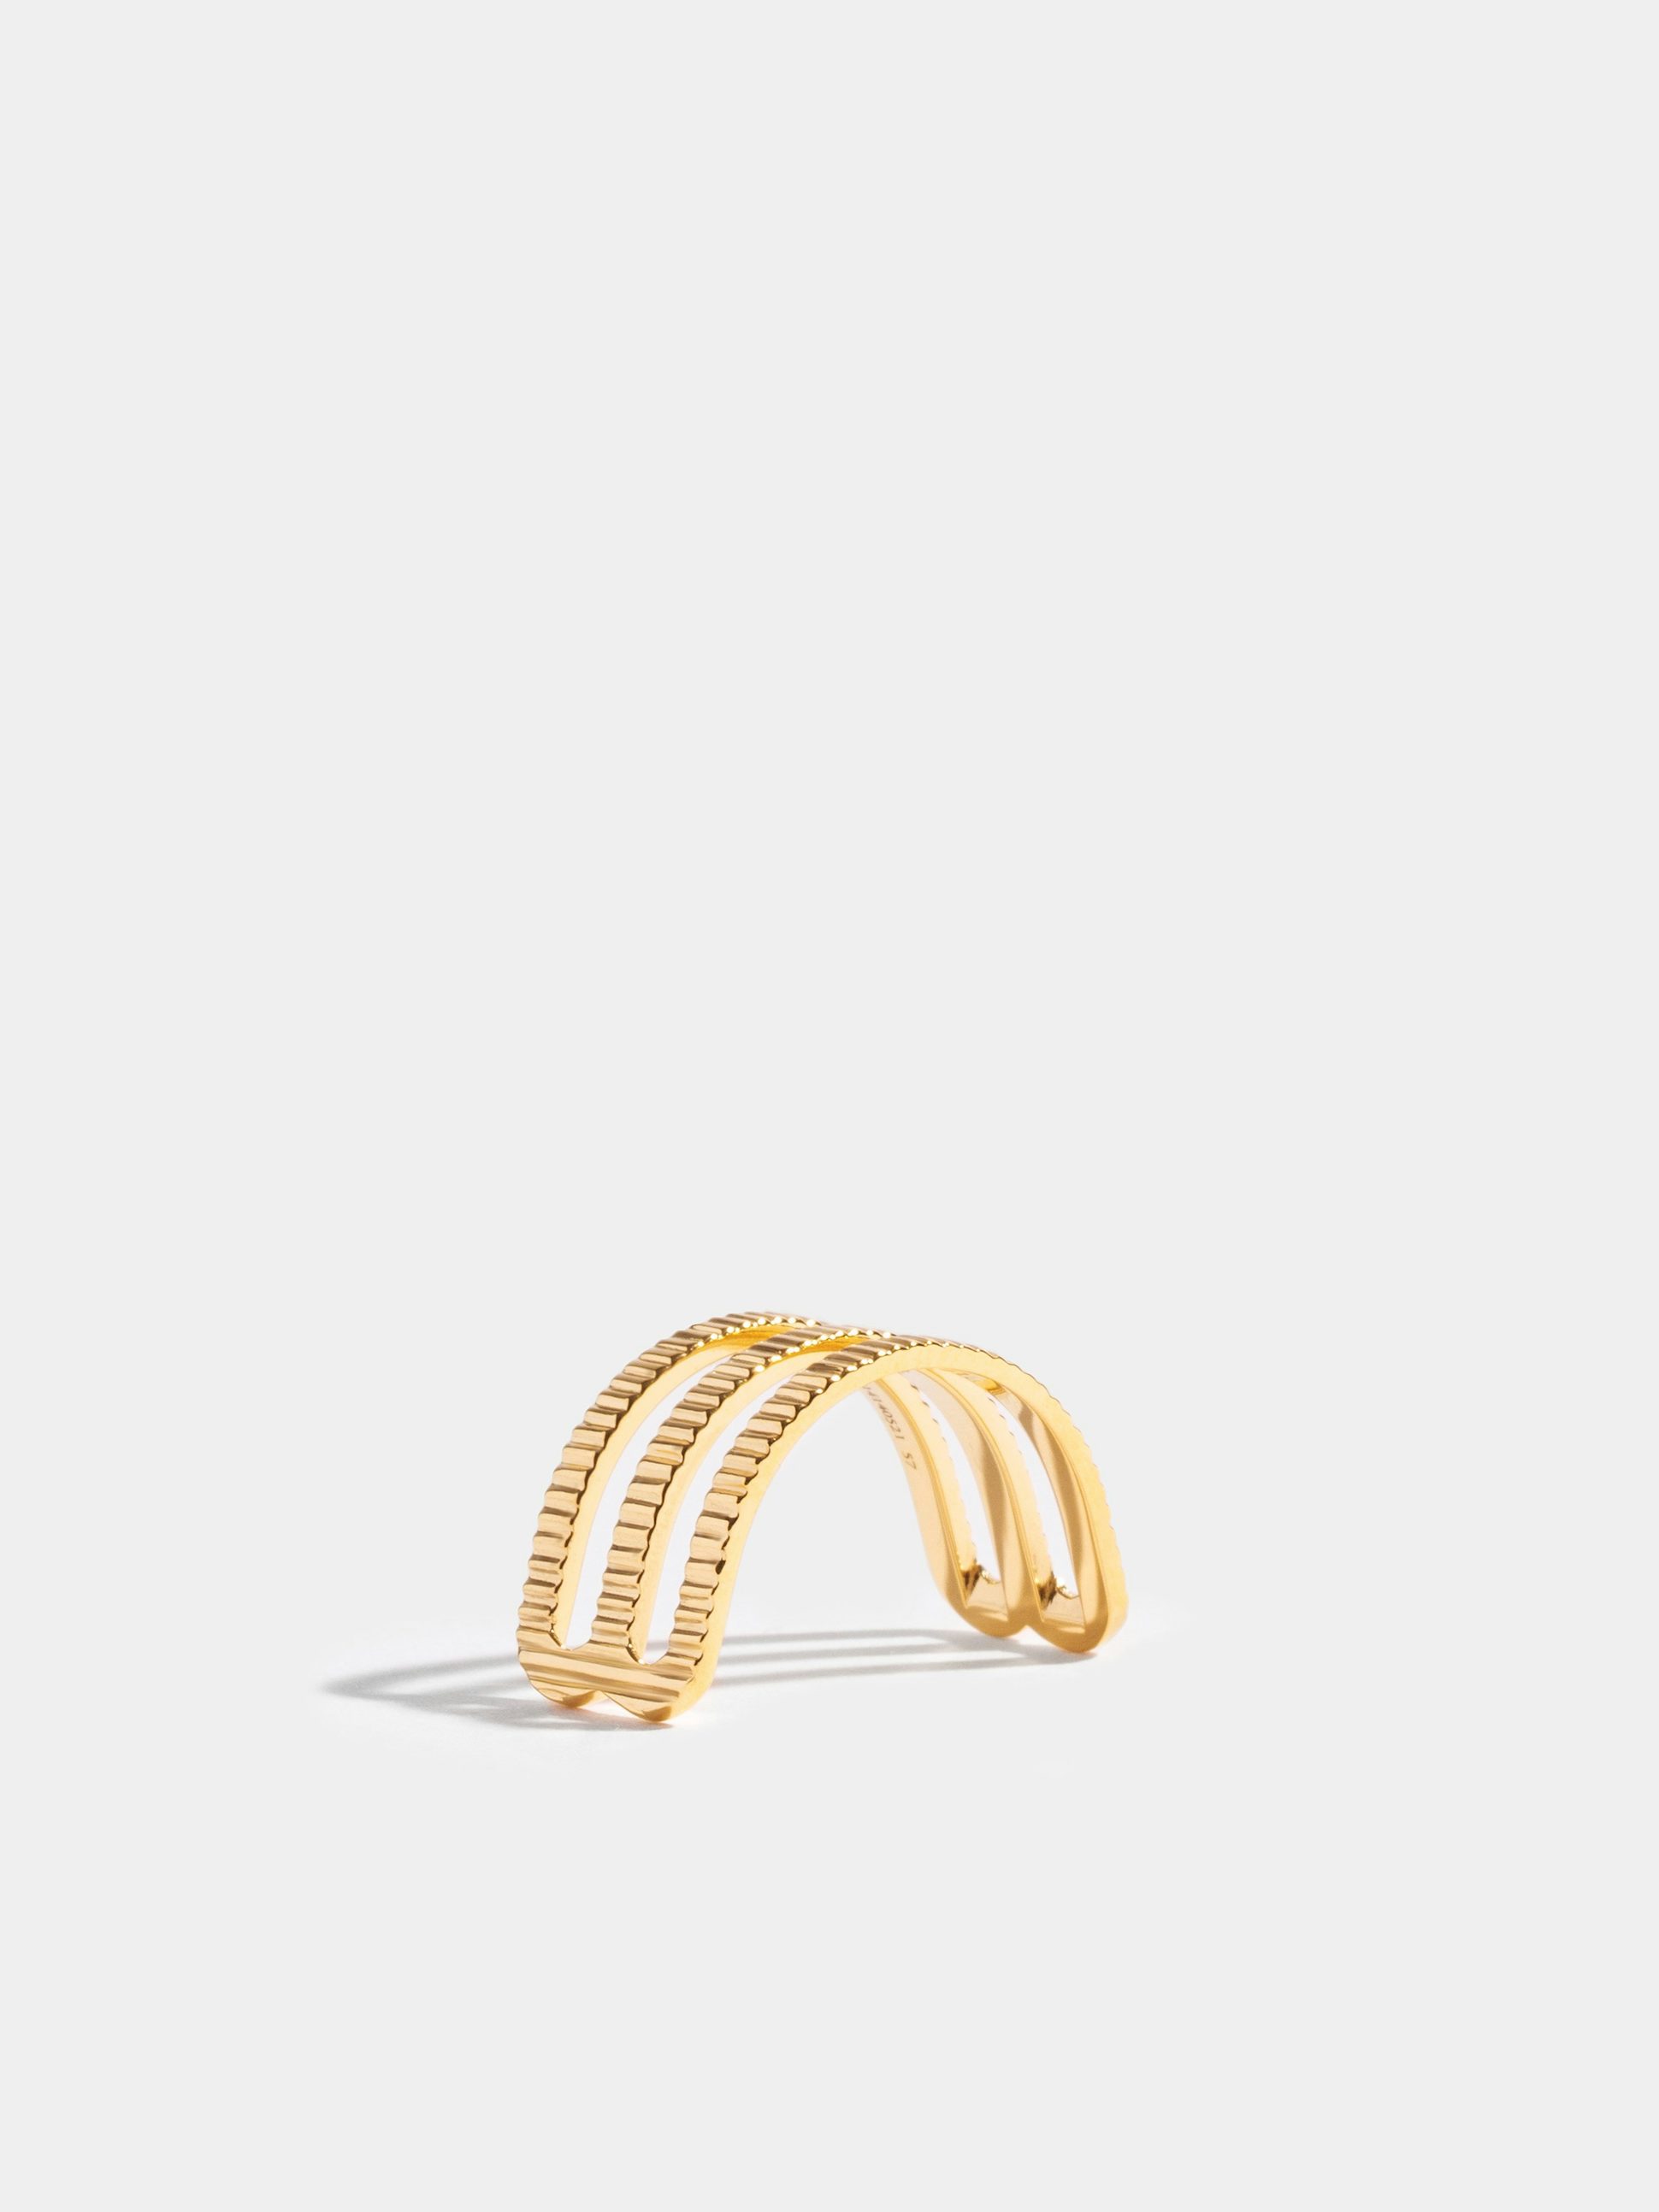 Étreintes double half-ring in 18k Fairmined ethical yellow gold, with ridges finish.